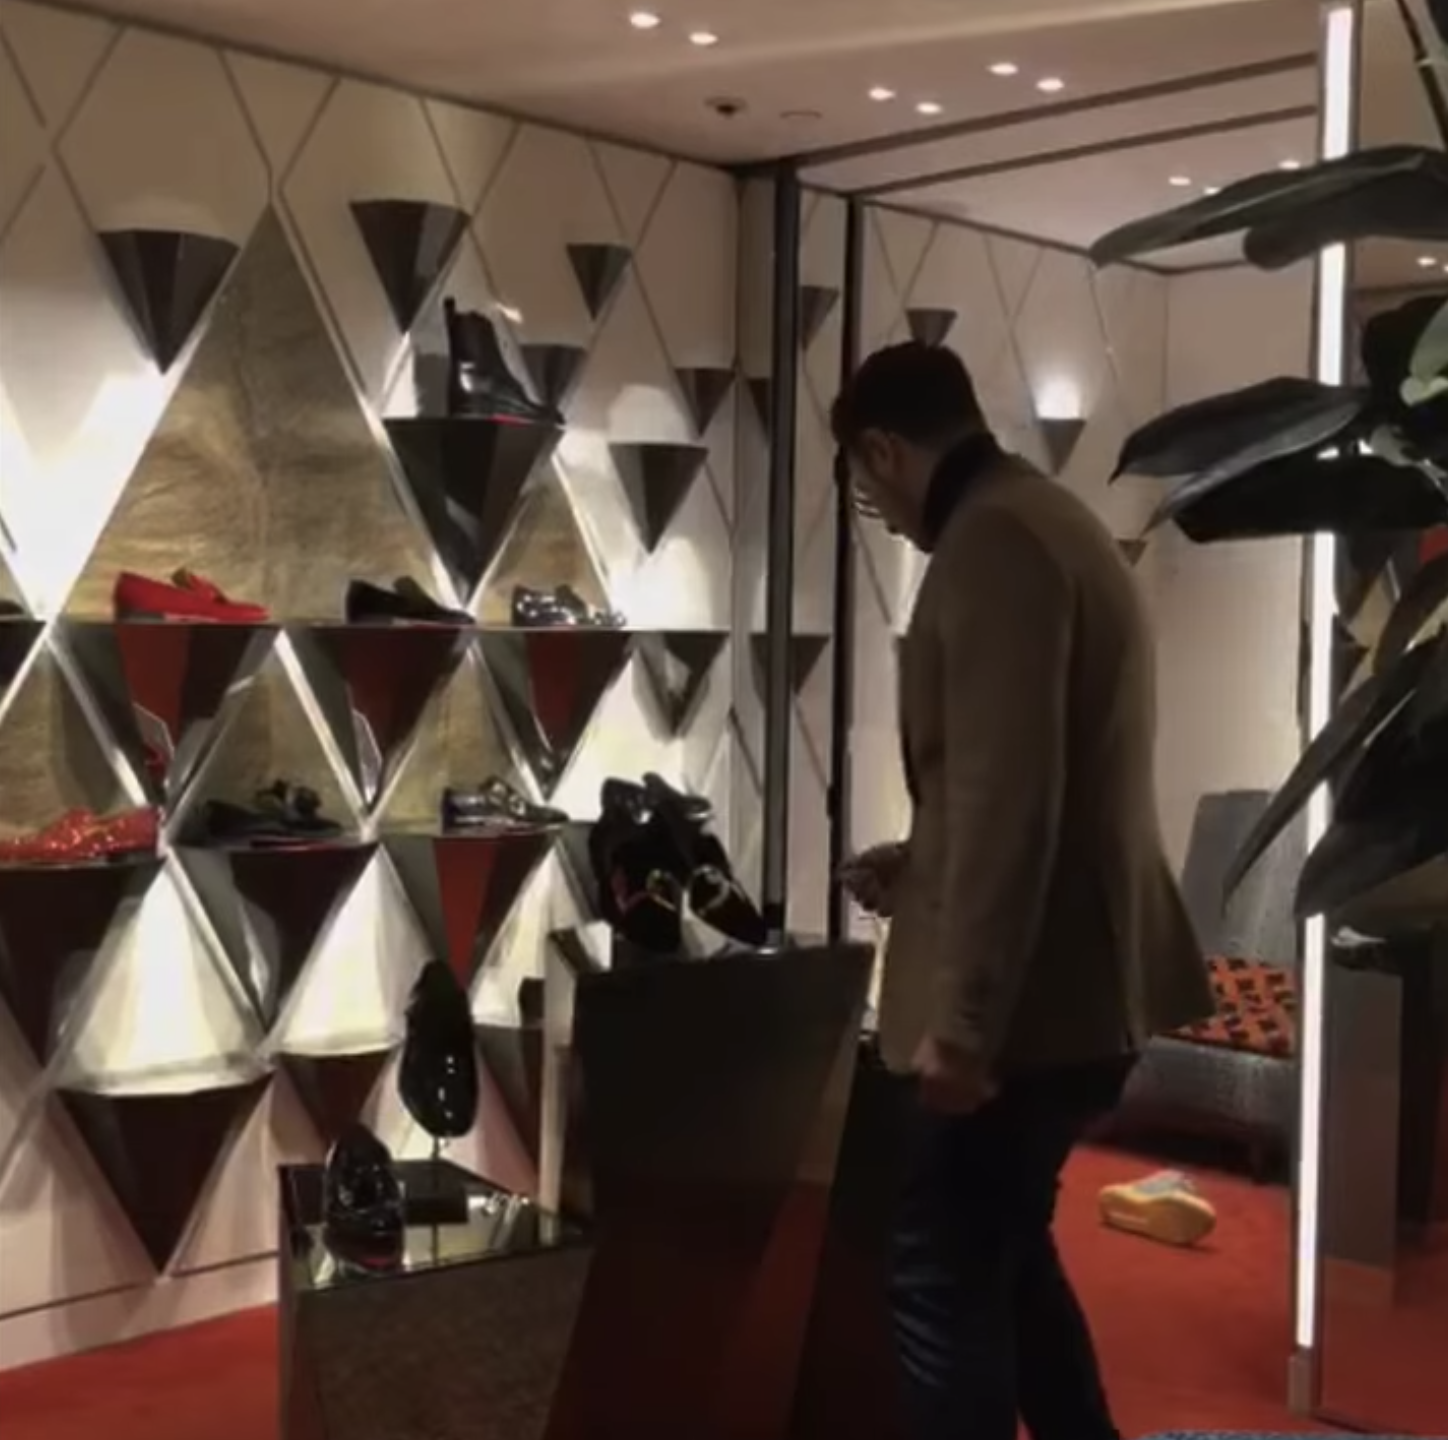 Simon looking at shoes in a store